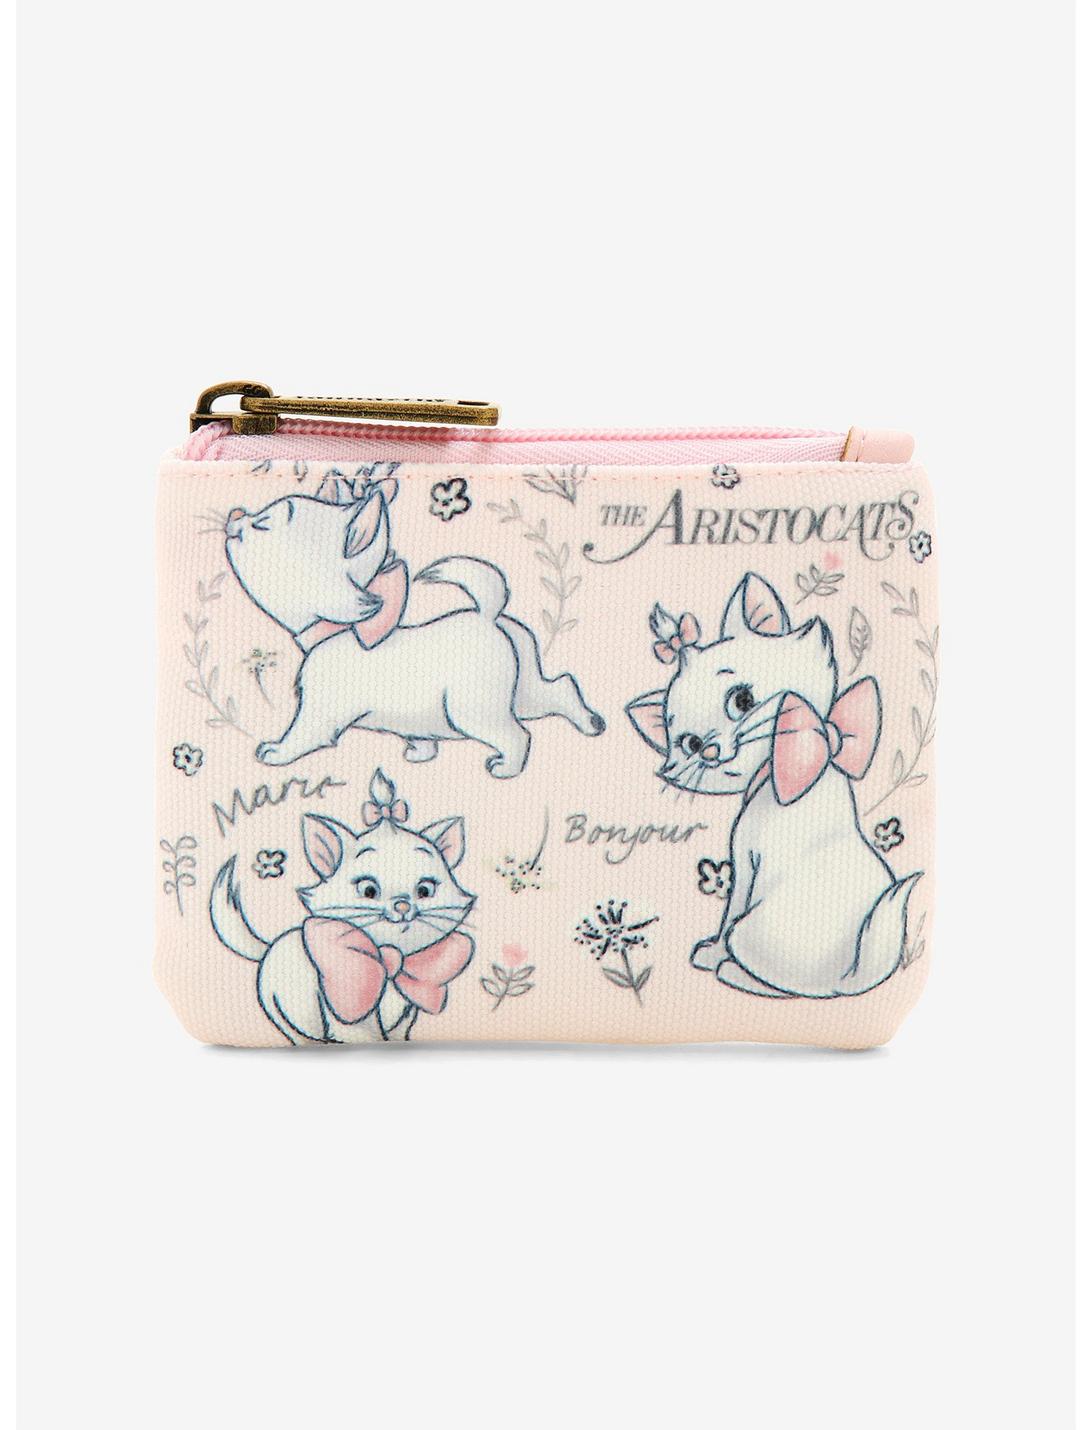 Disney Aristocats Marie Coin Purse Cardholder Reusable Tote Bag Loungefly 